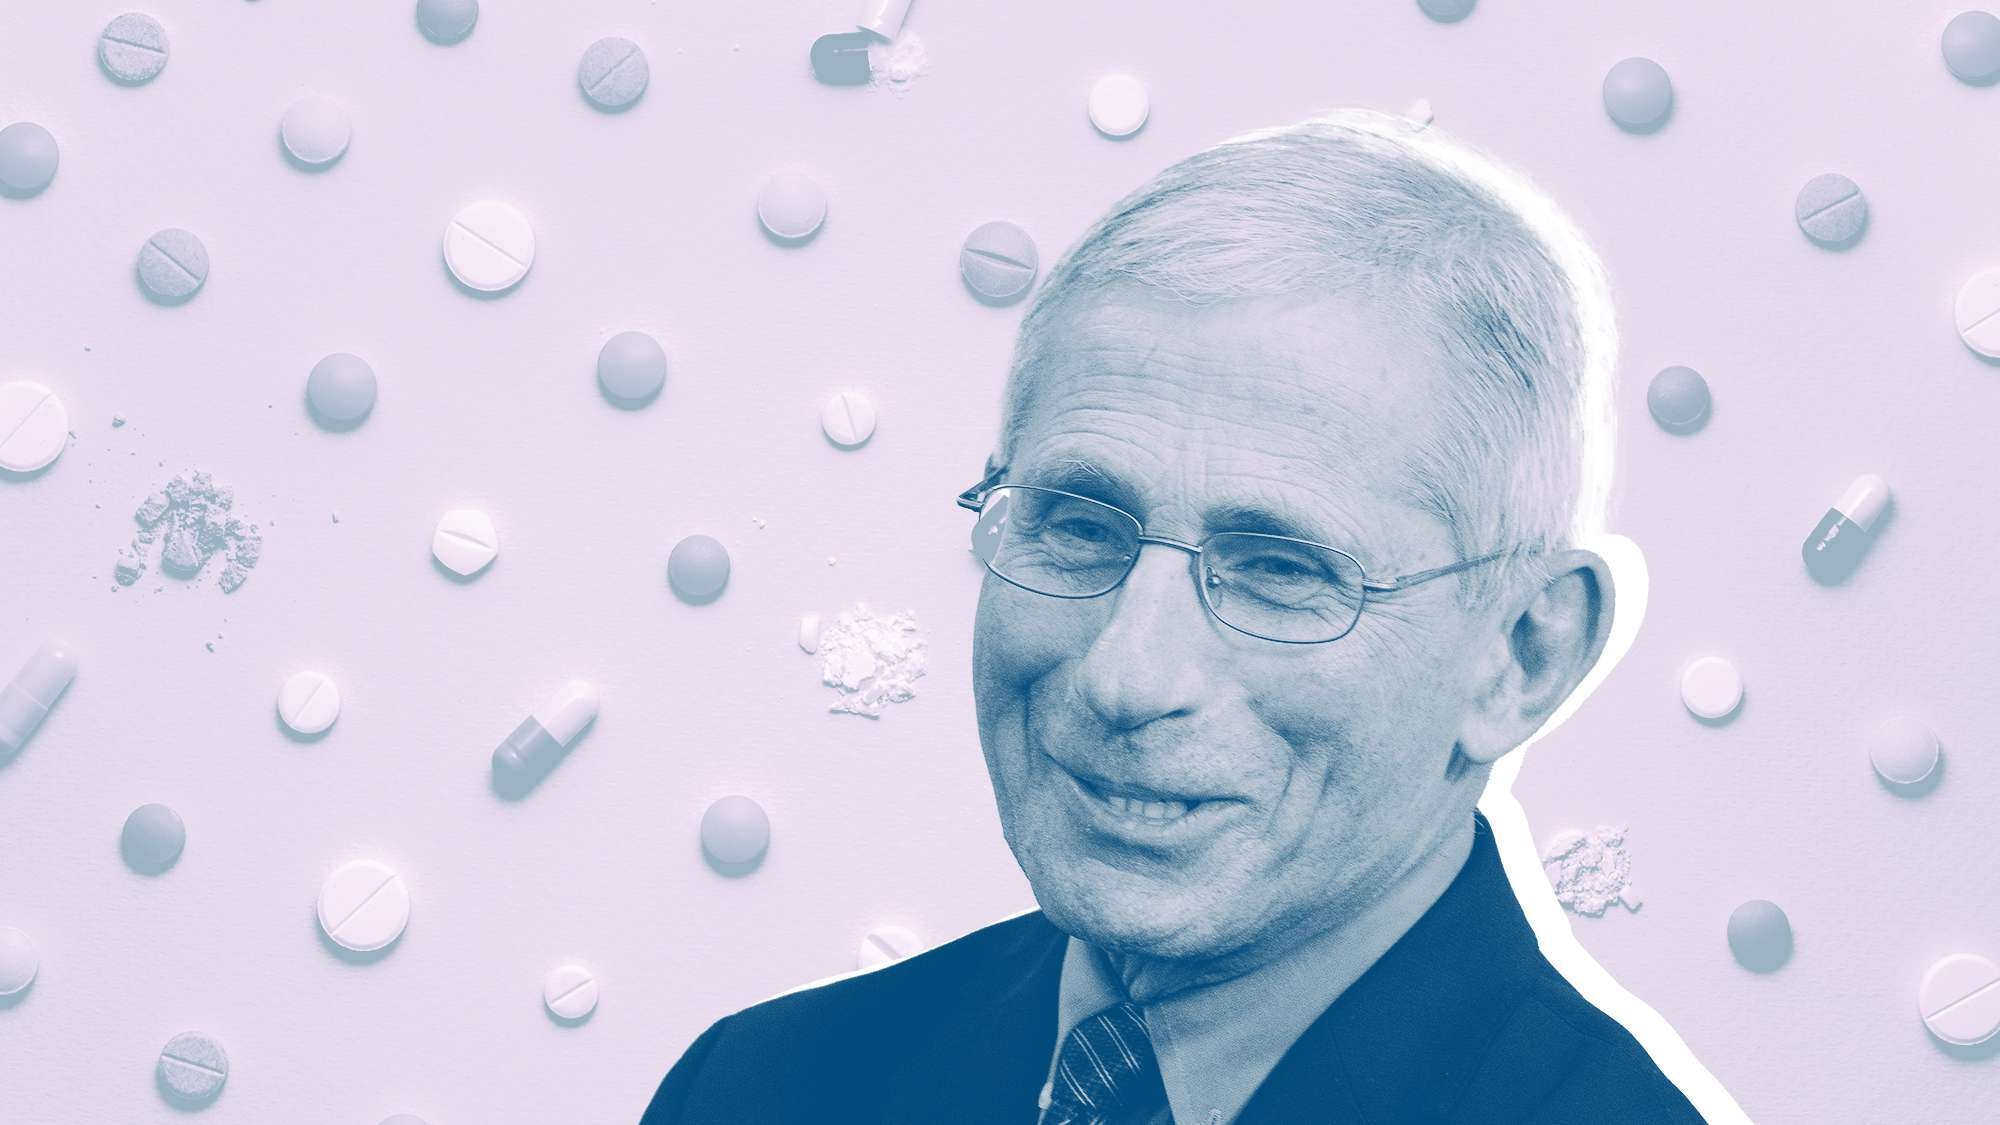 Dr. Fauci Recommended Vitamin D and C To Boost Your Immune System